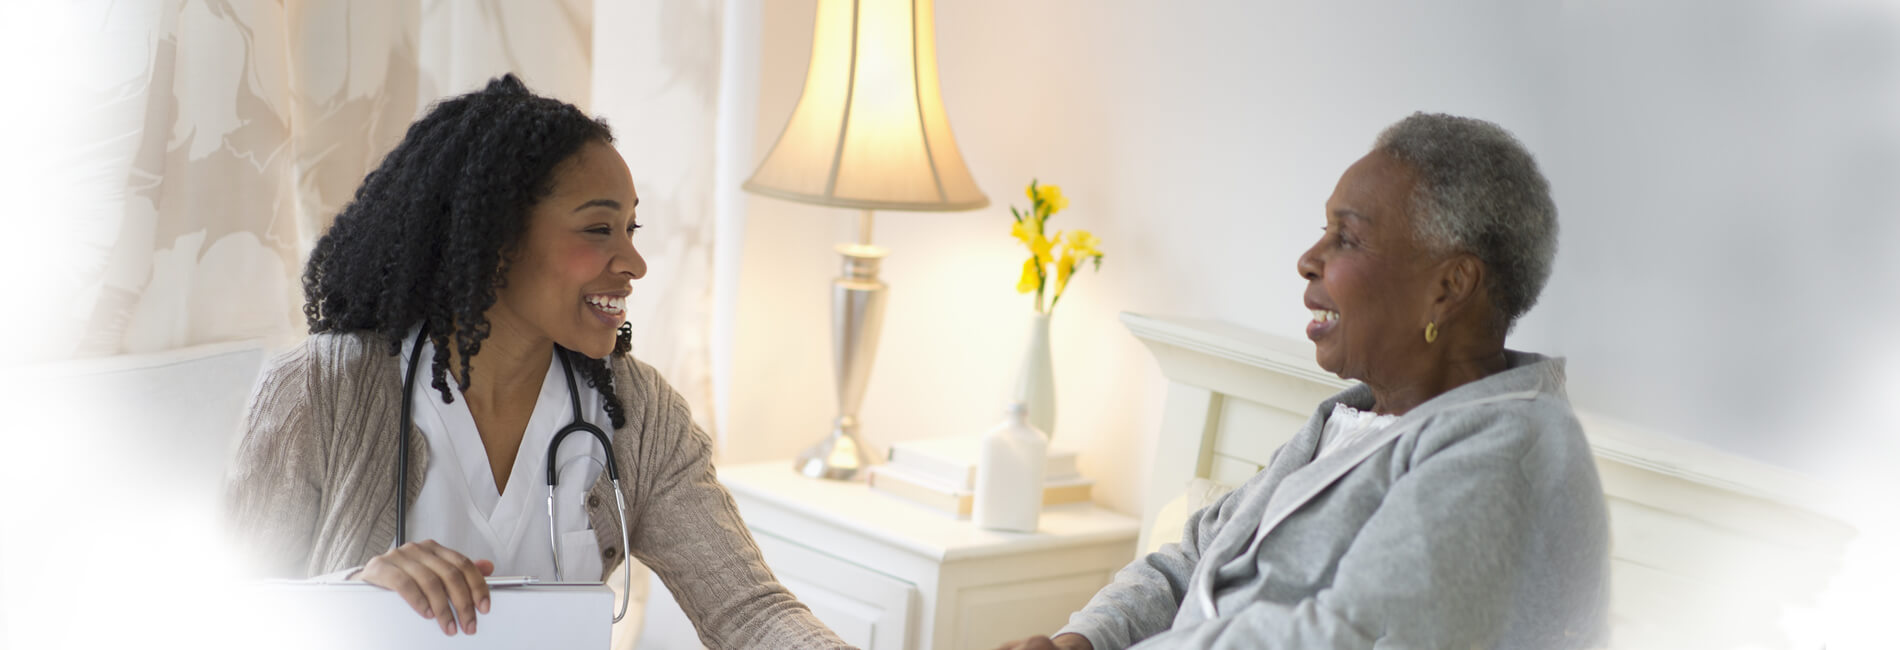 A Home Health registered nurse speaking with an elderly client in her bedroom.